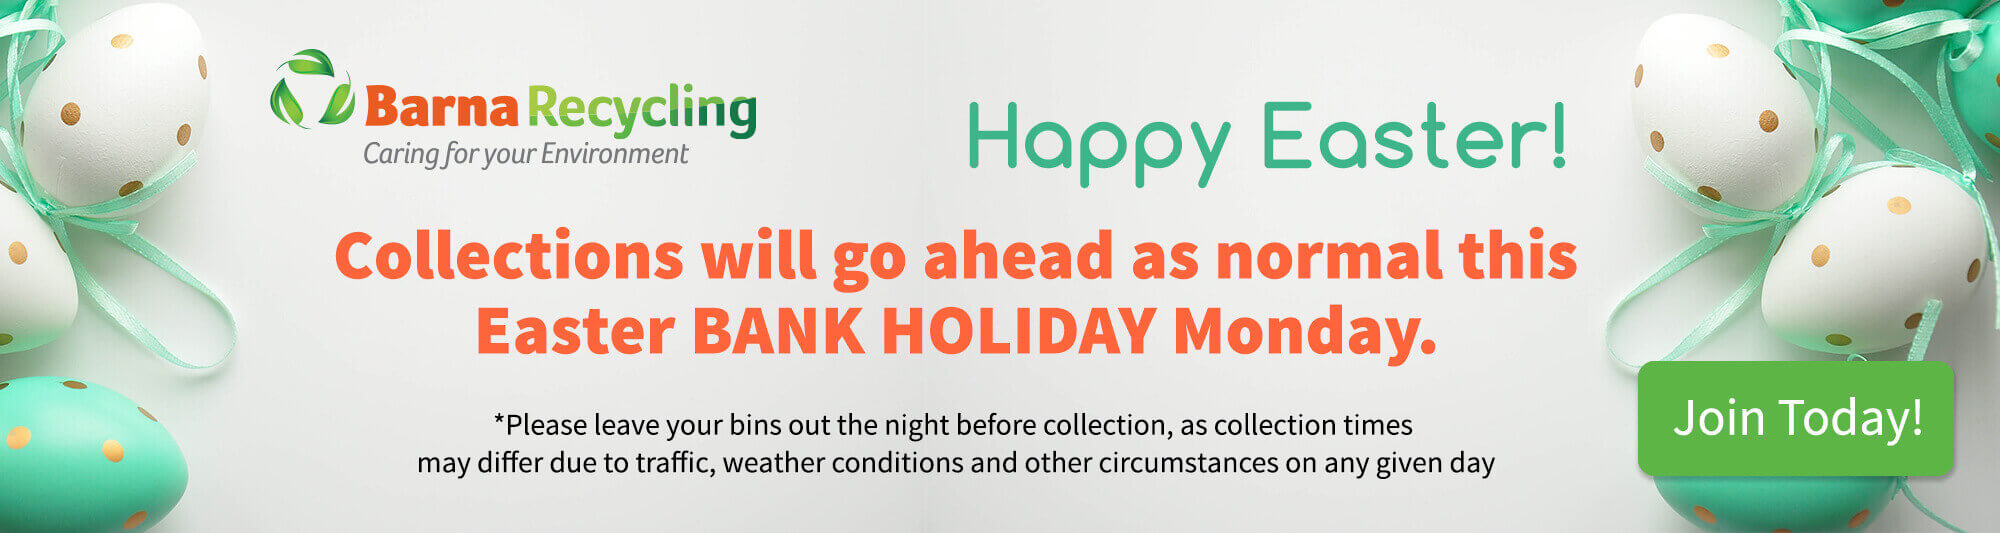 Bank-Holiday-Banner-Easter-2019-1-1-1